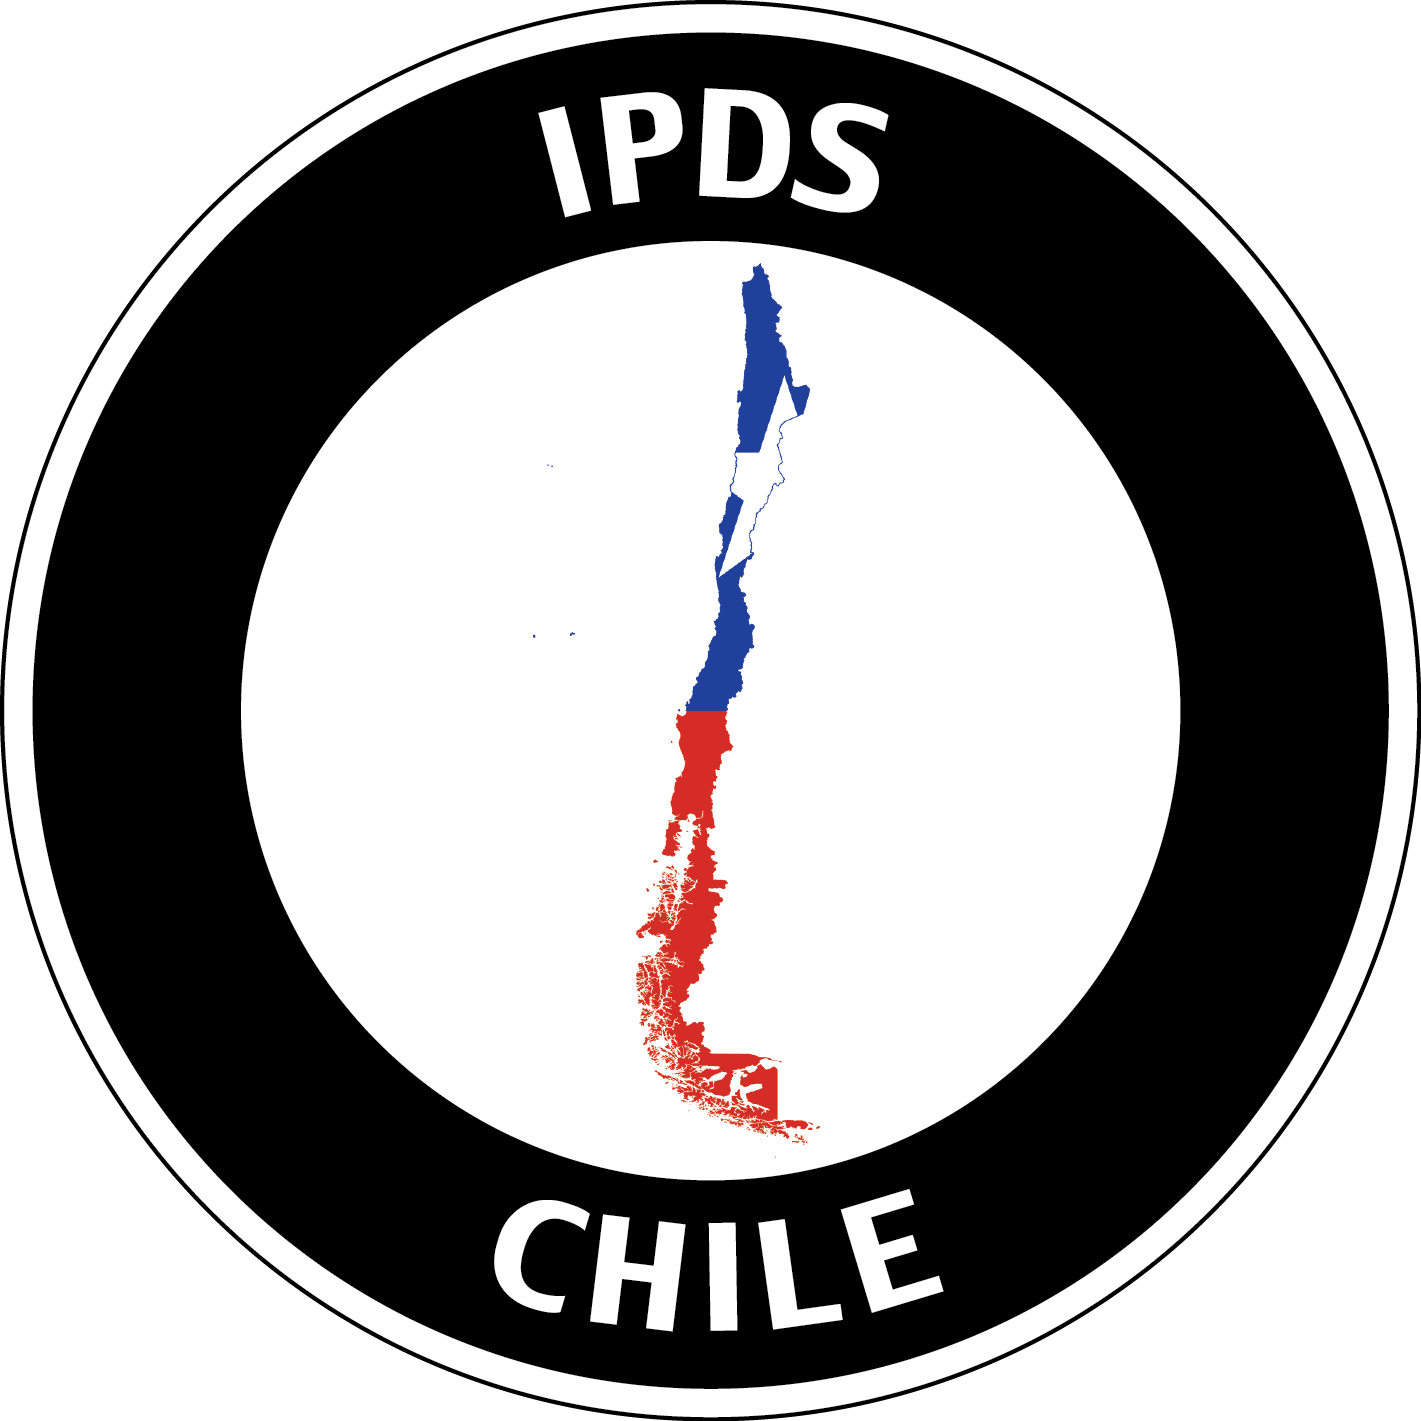 IPDS Chile icon with country and flag